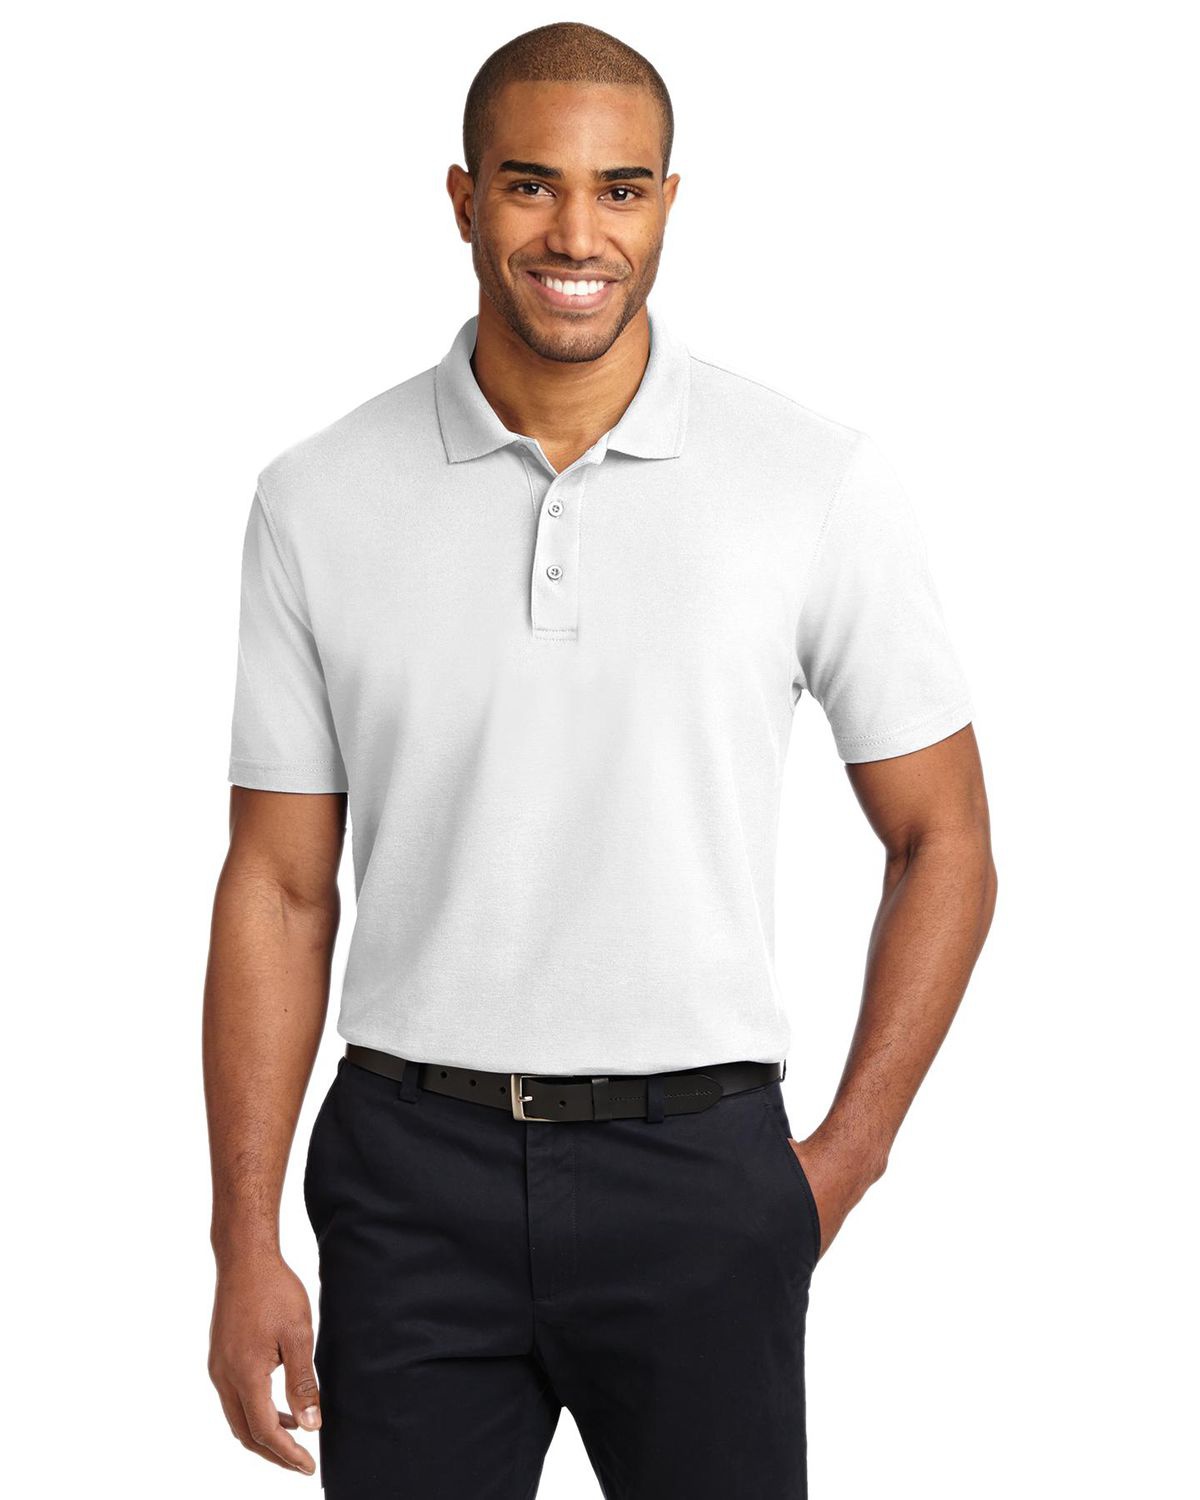 'Port Authority K510 Stain-Resistant Sport Shirt'